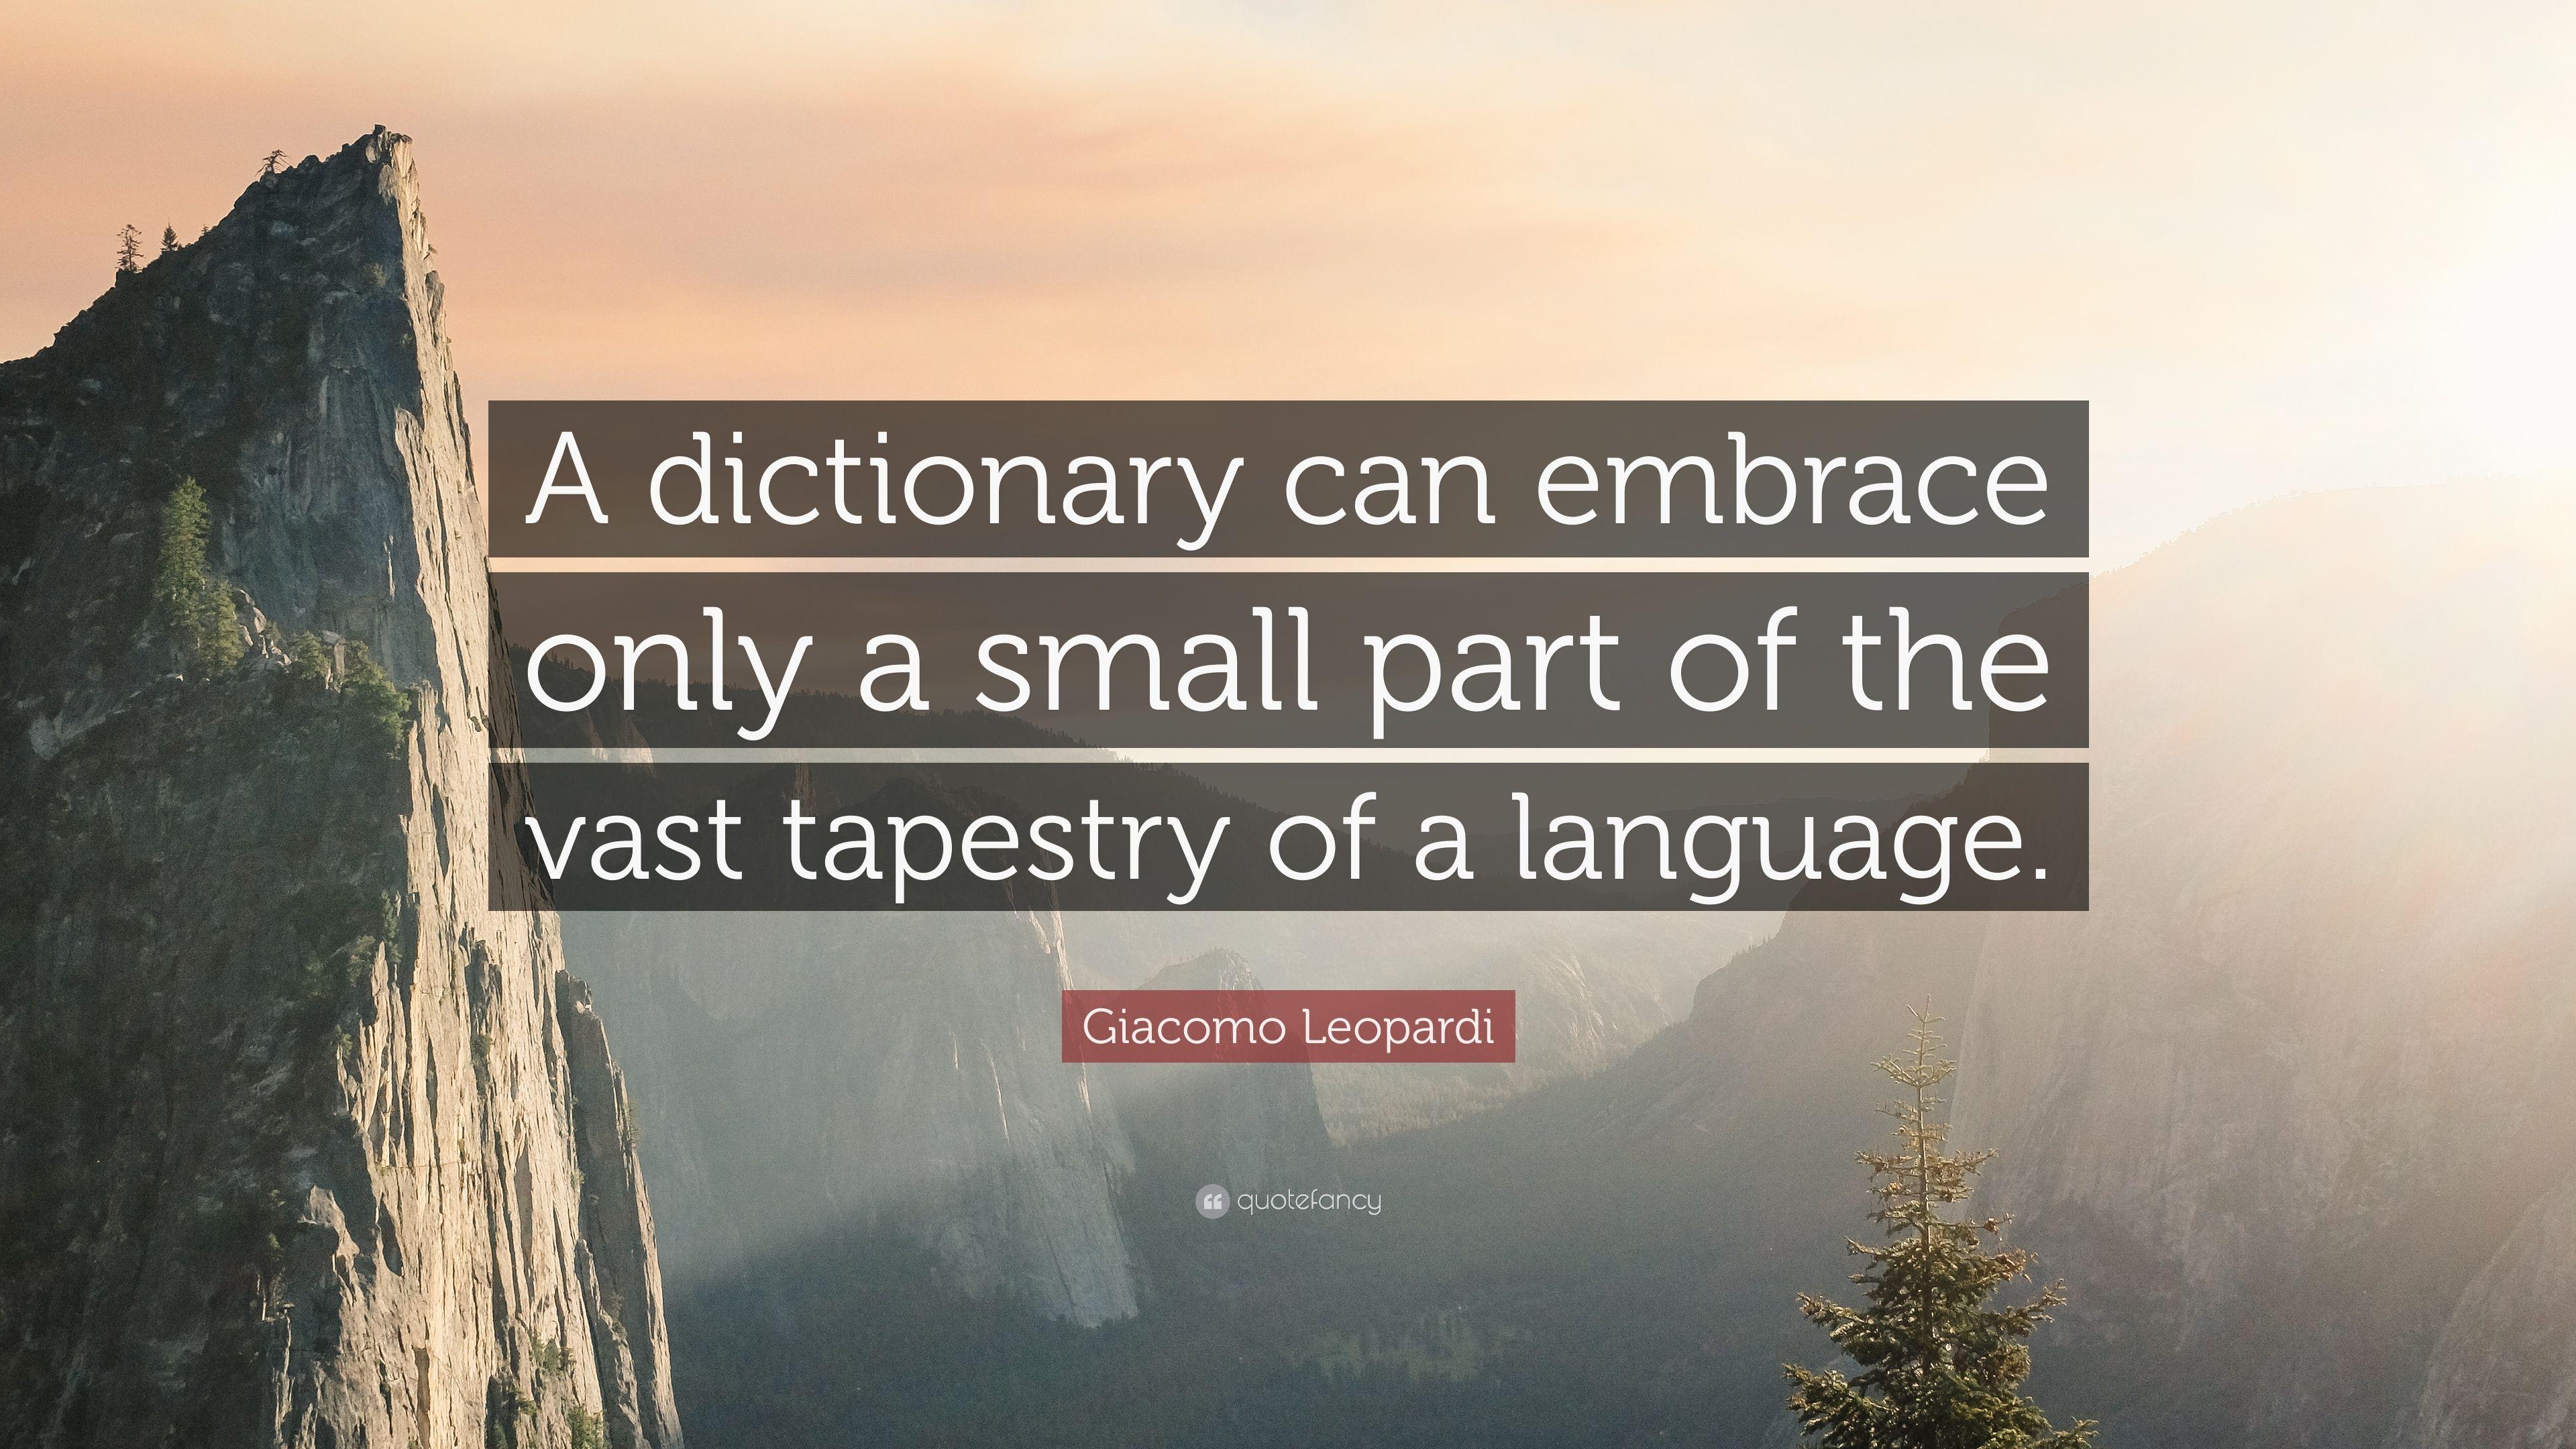 Giacomo Leopardi Quote: “A dictionary can embrace only a small part